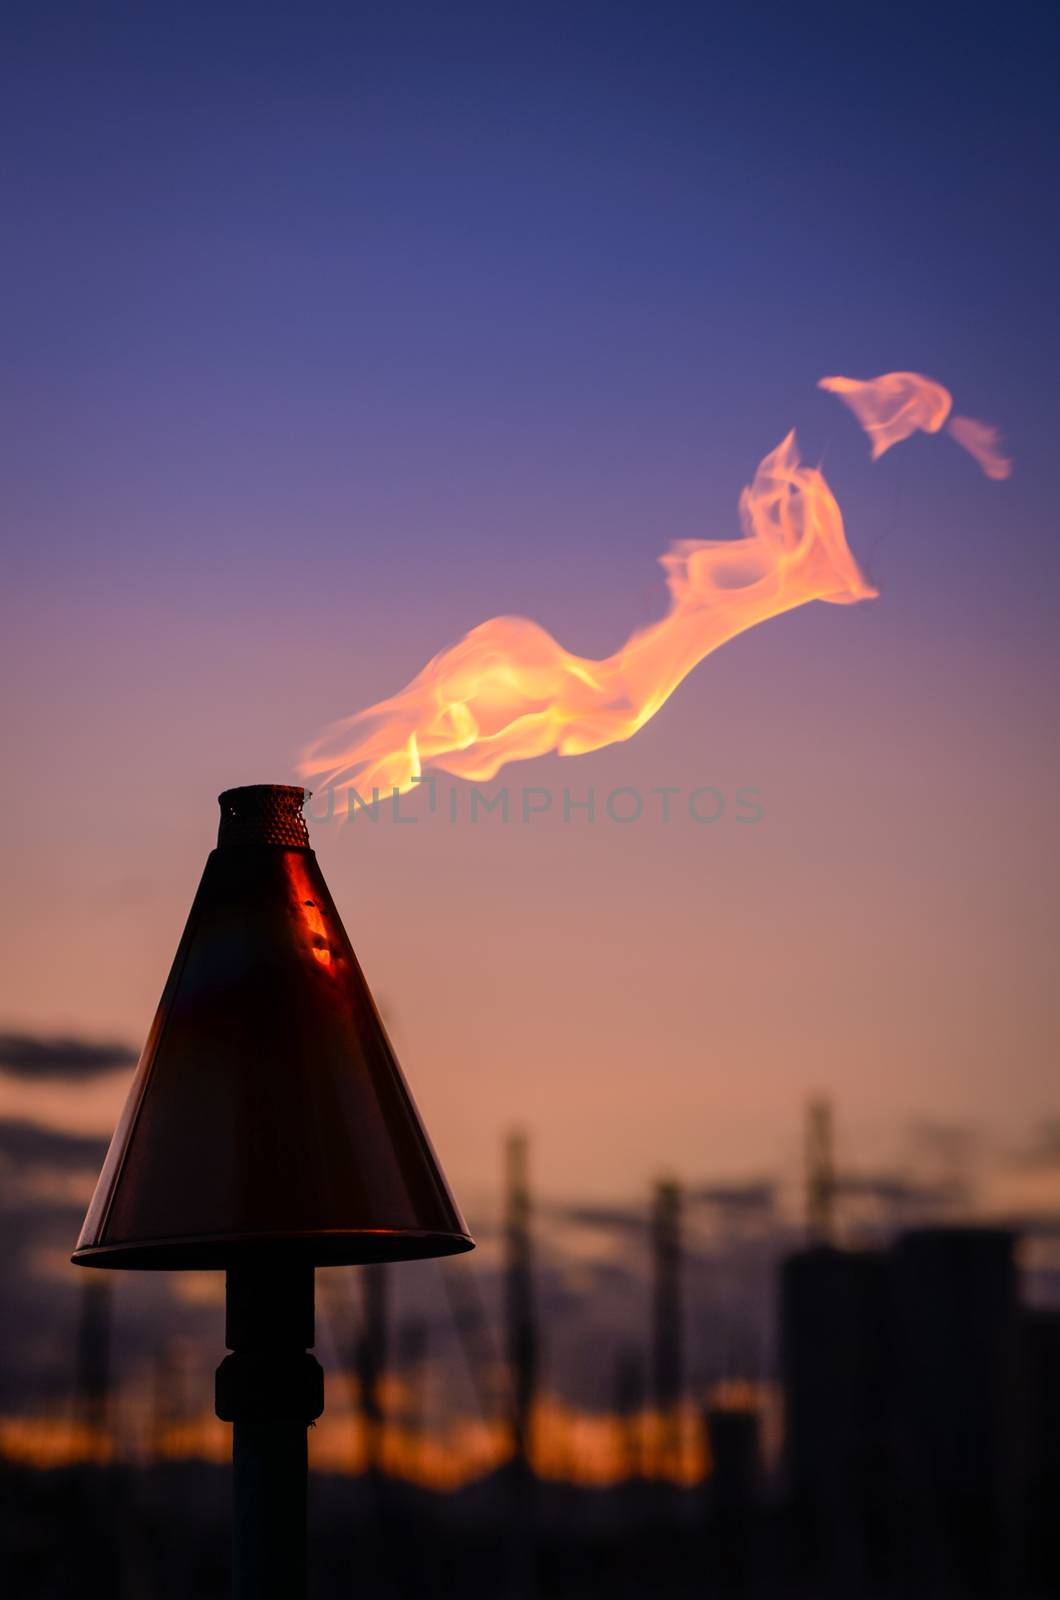 Retro Style Image Of A Hawaiian Tiki Torch By The Coast In Honolulu At Sunset